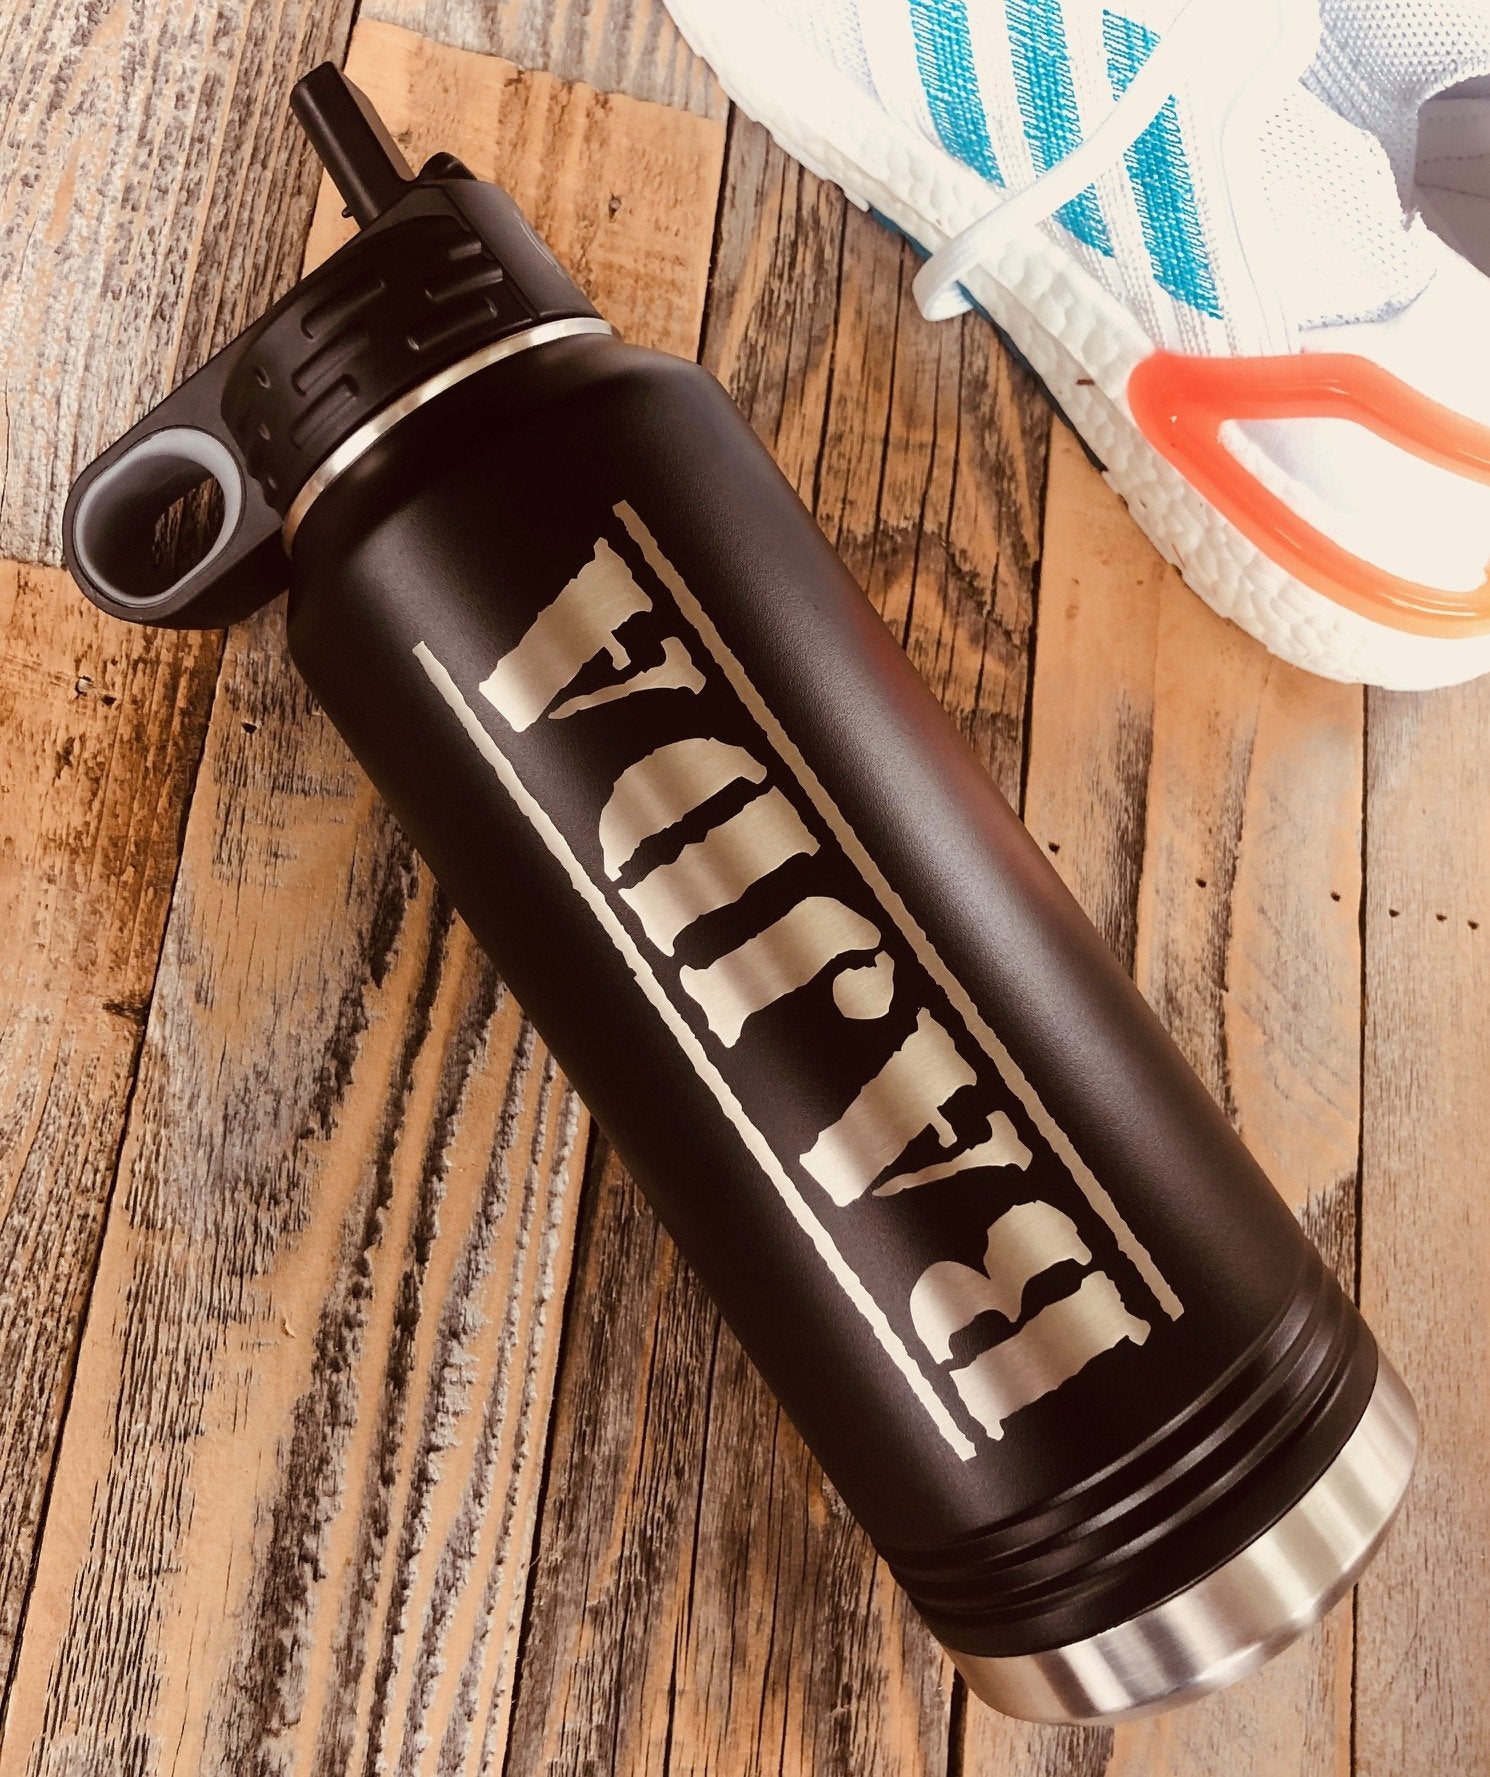 Black Personalized Water Bottle for Men - Groovy Guy Gifts